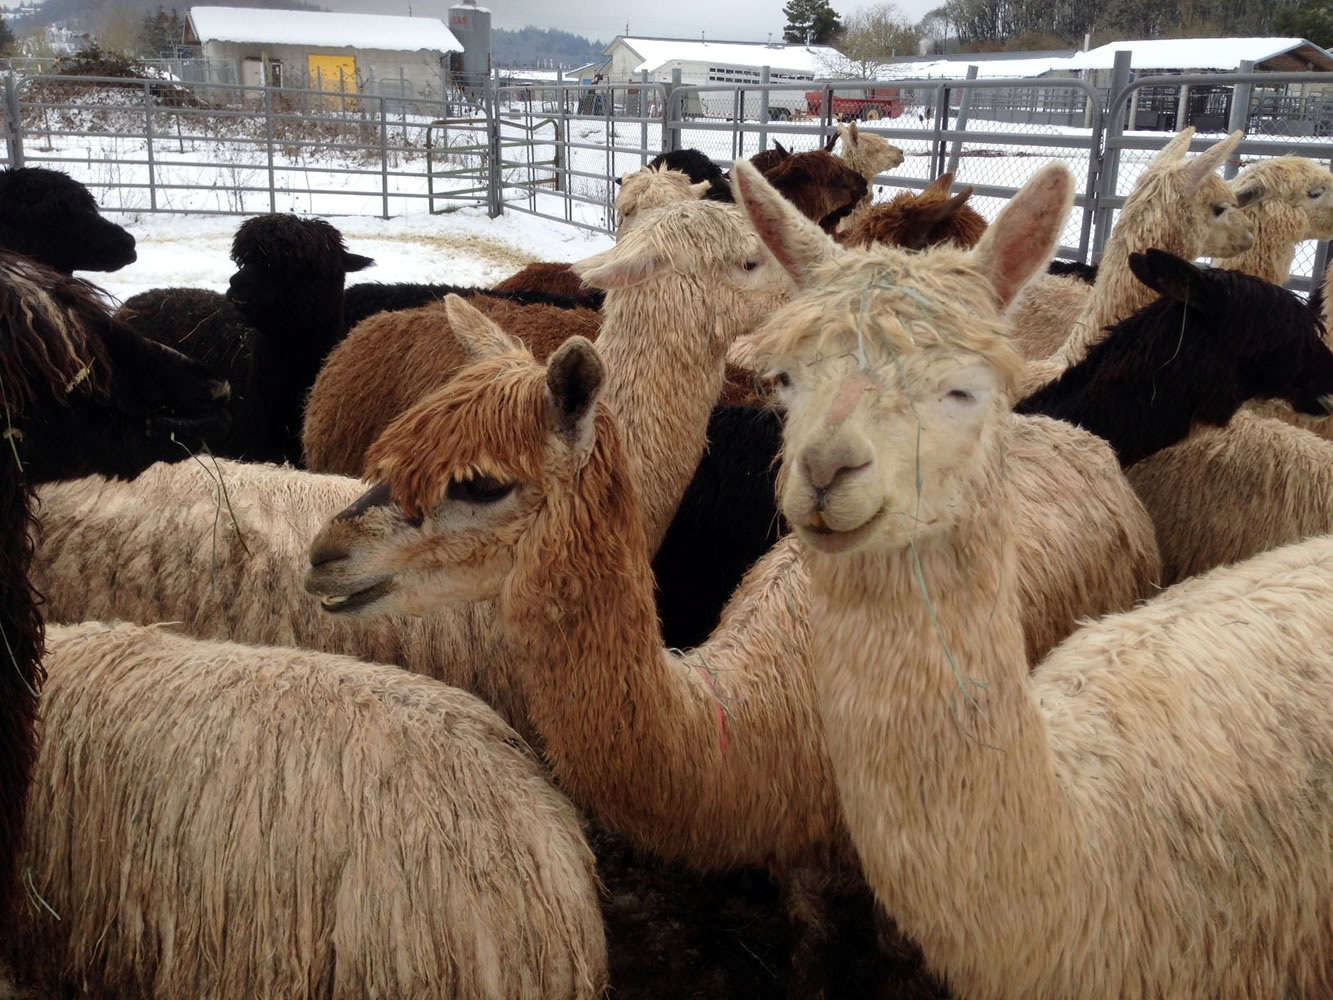 Larry Pribyl/Oregon State University
Starving alpacas are being cared for at Oregon State University's College of Veterinary Medicine in Corvallis, Ore., after being seized from a breeding ranch by Polk County Sheriff's Office. Deputies say about 175 alpacas were seized from owners Robert and Jocelyn Silver, who also face animal neglect charges.